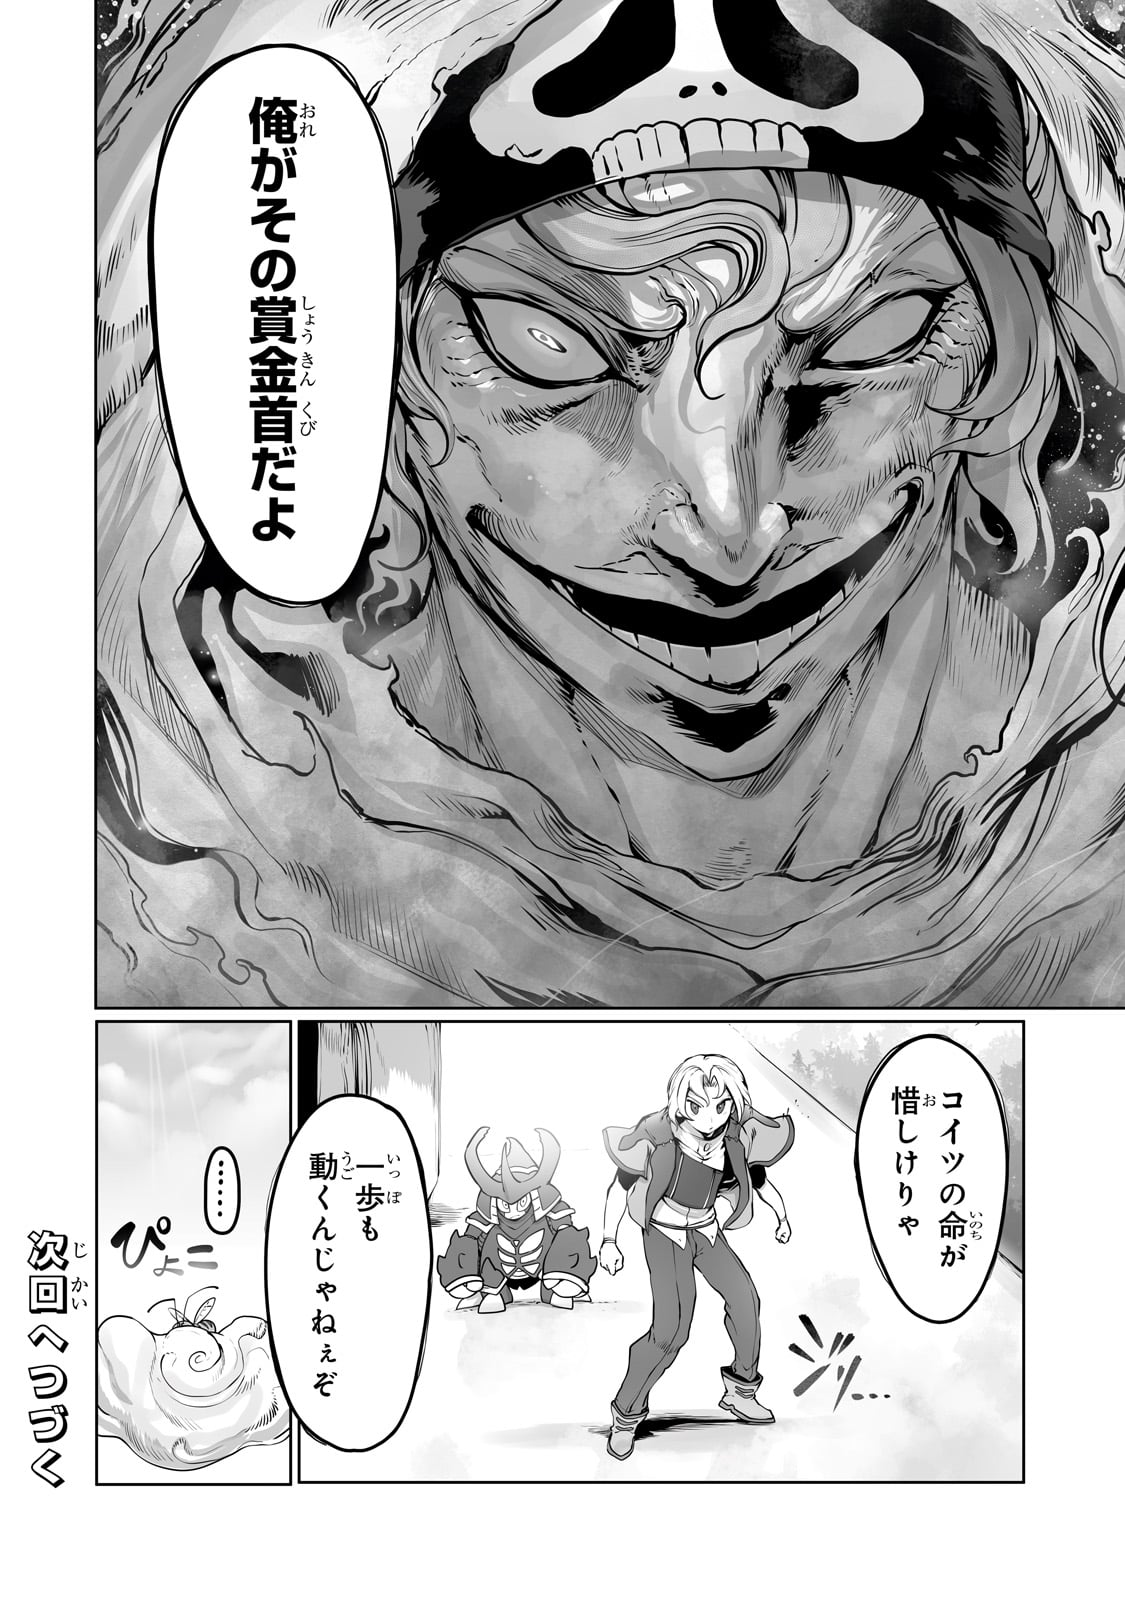 The Useless Tamer Will Turn Into the Top Unconsciously by My Previous Life Knowledge - Chapter 35 - Page 24